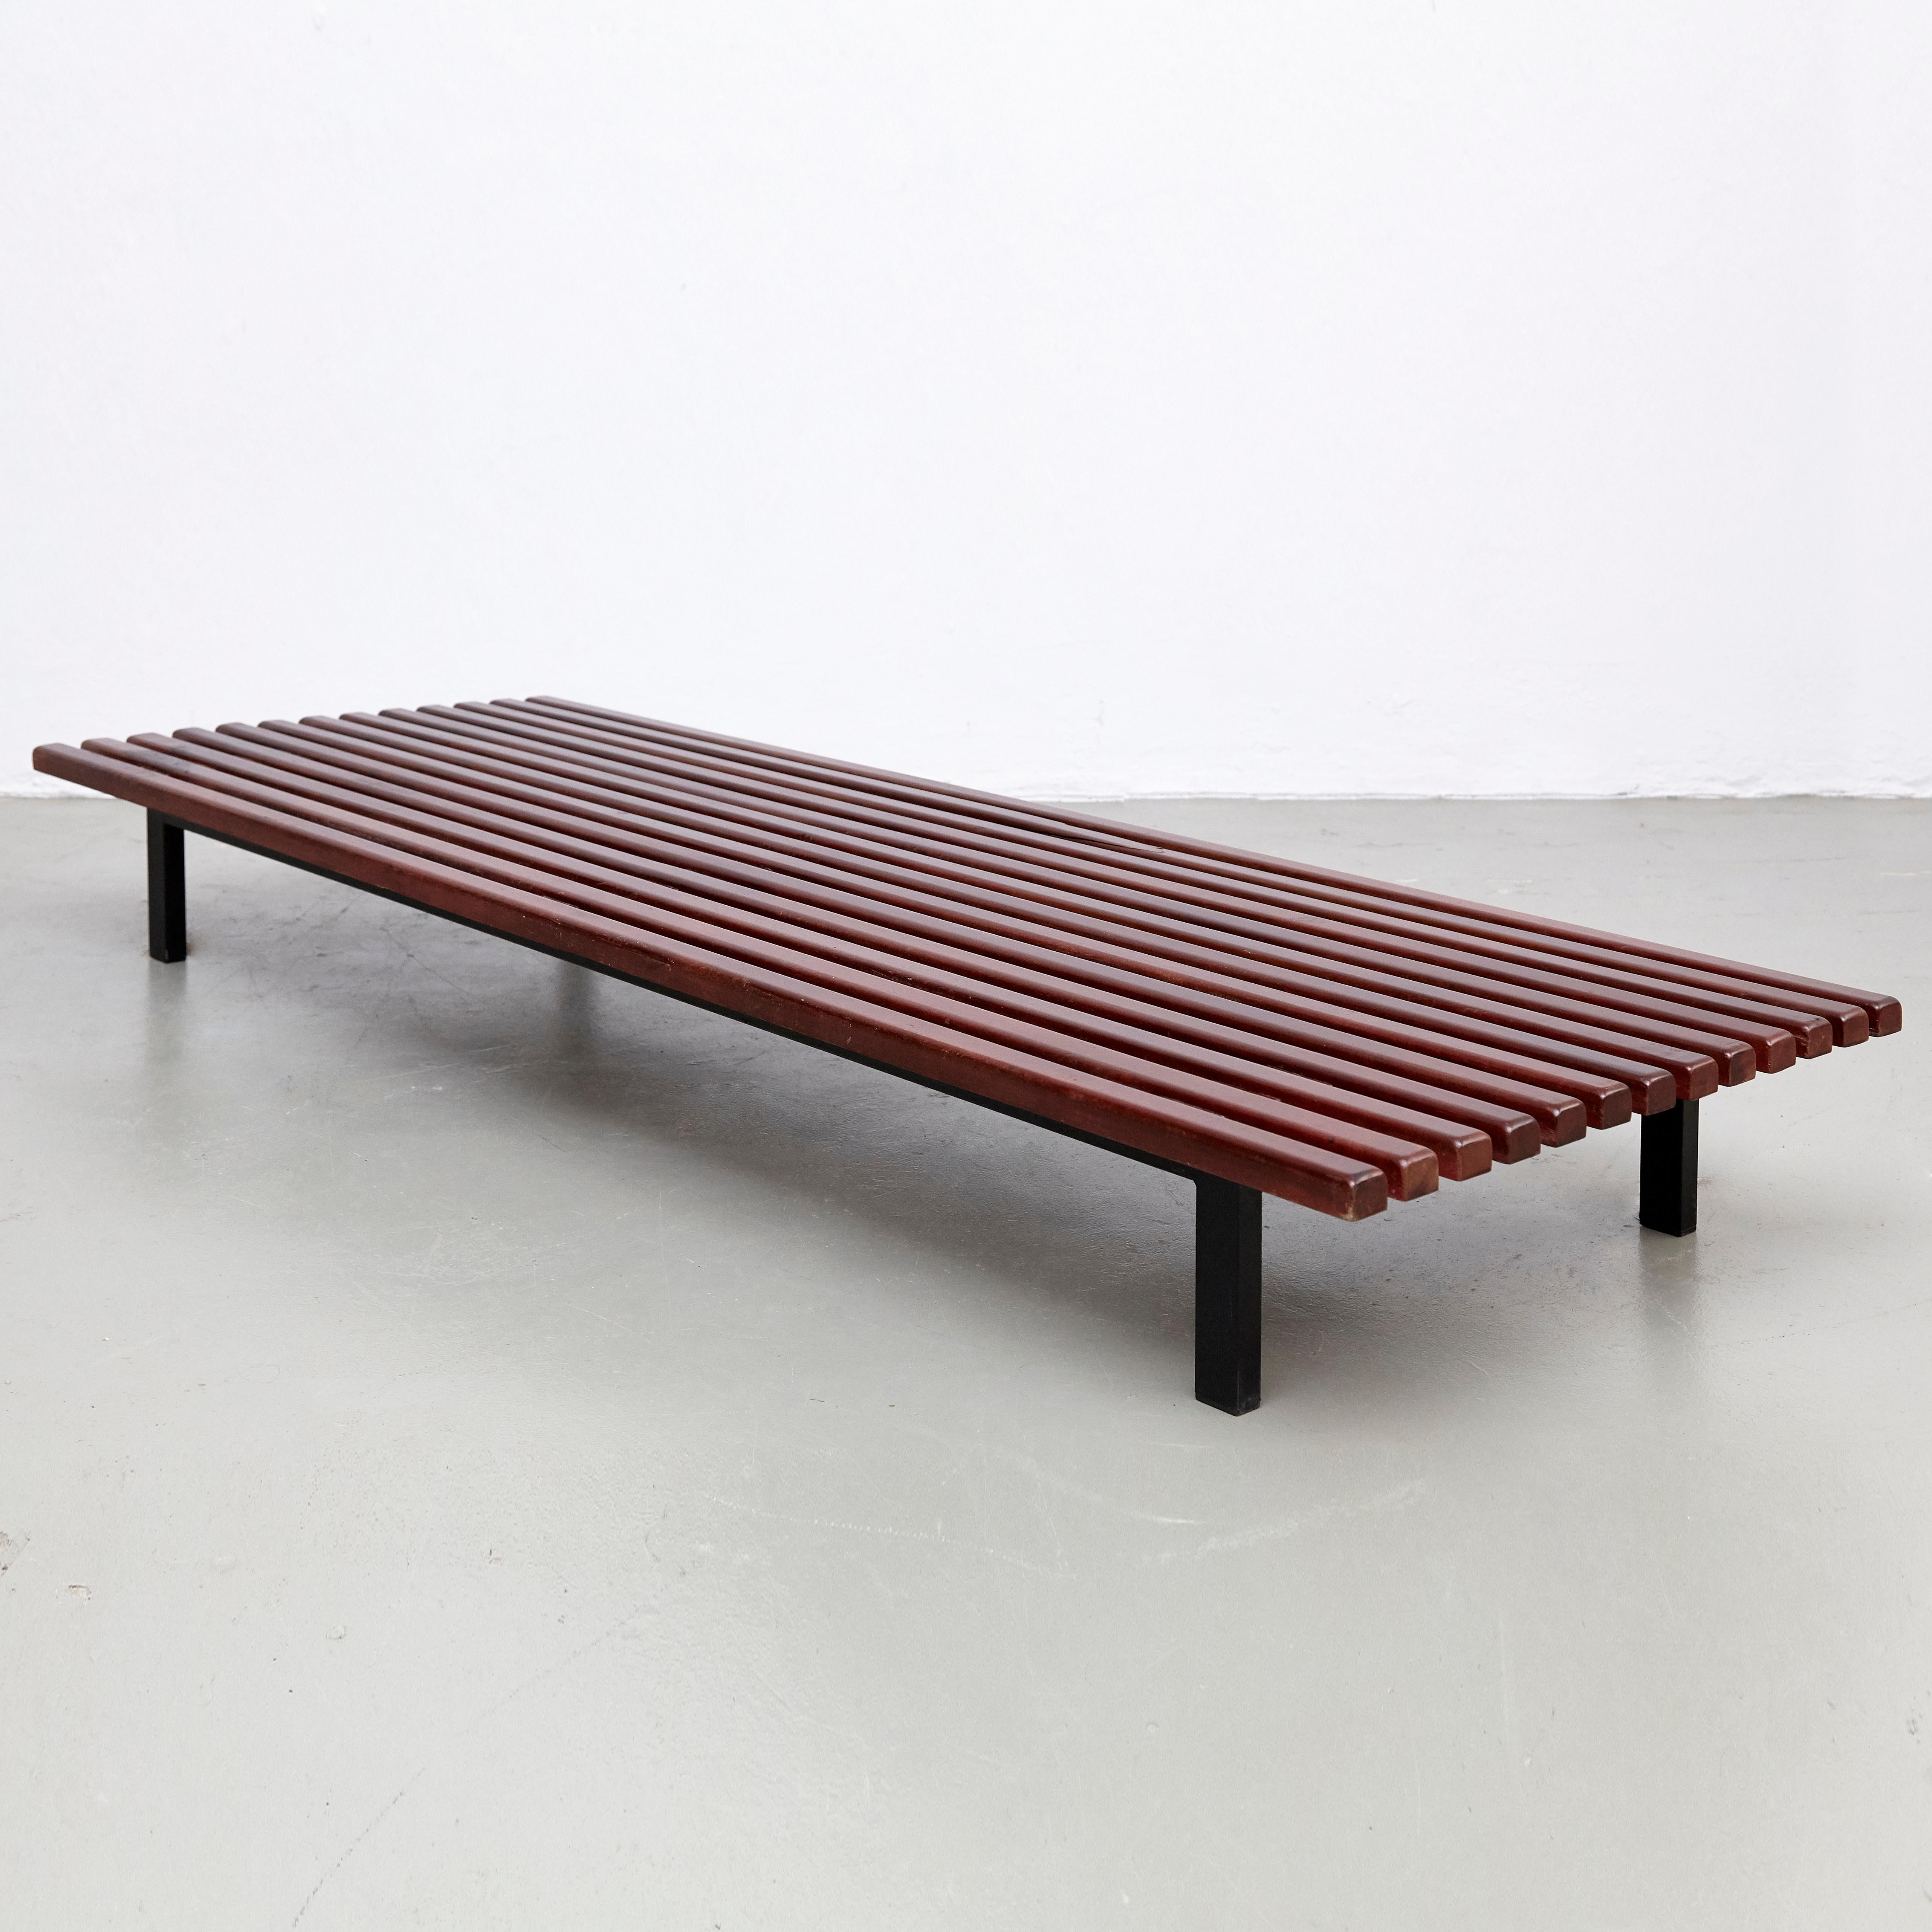 Bench designed by Charlotte Perriand, circa 1950.
Edited by Steph Simon (France)

Wood, metal frame legs has been redone according the original.

Provenance: Cansado, Mauritania (Africa).

In original condition, with minor wear consistent